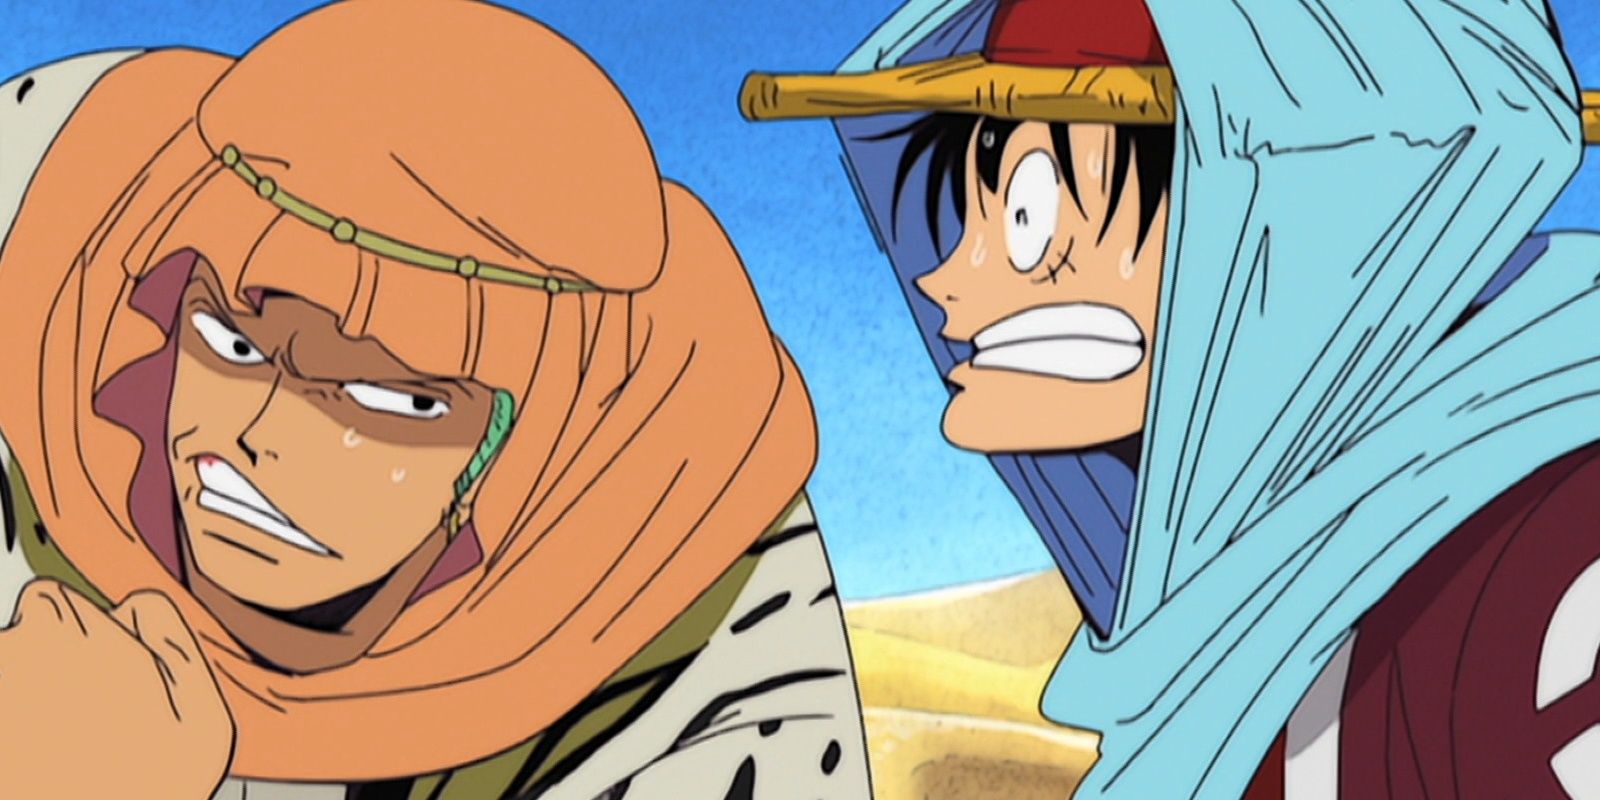 Roronoa Zoro and Luffy wearing desert clothes in Alabasta Arc in One Piece